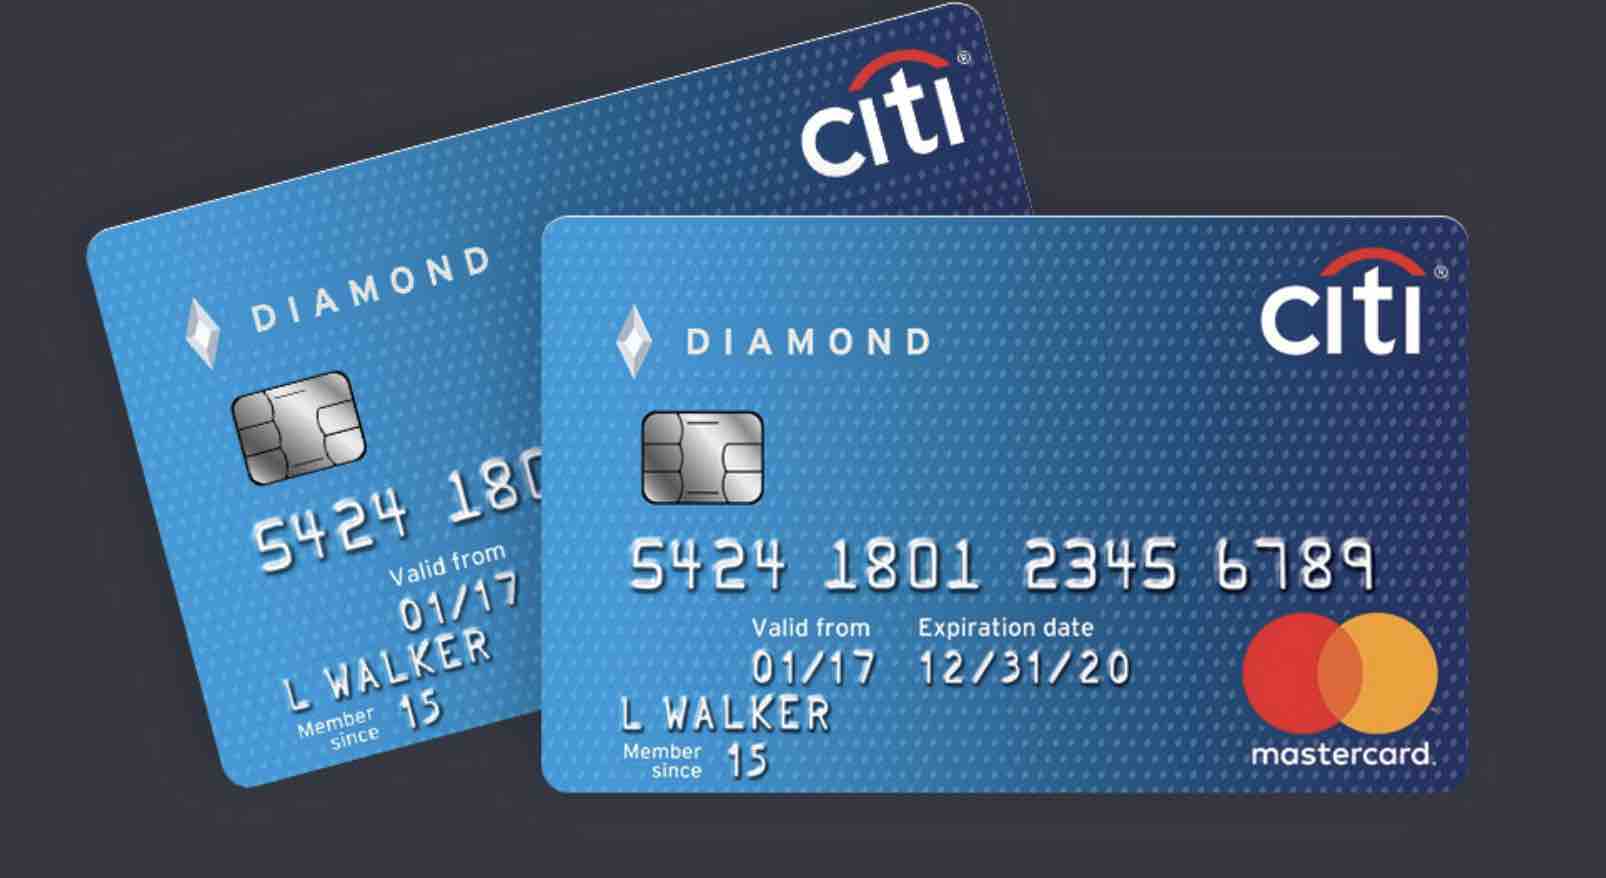 How Is Minimum Payment Determined For Citi Credit Card